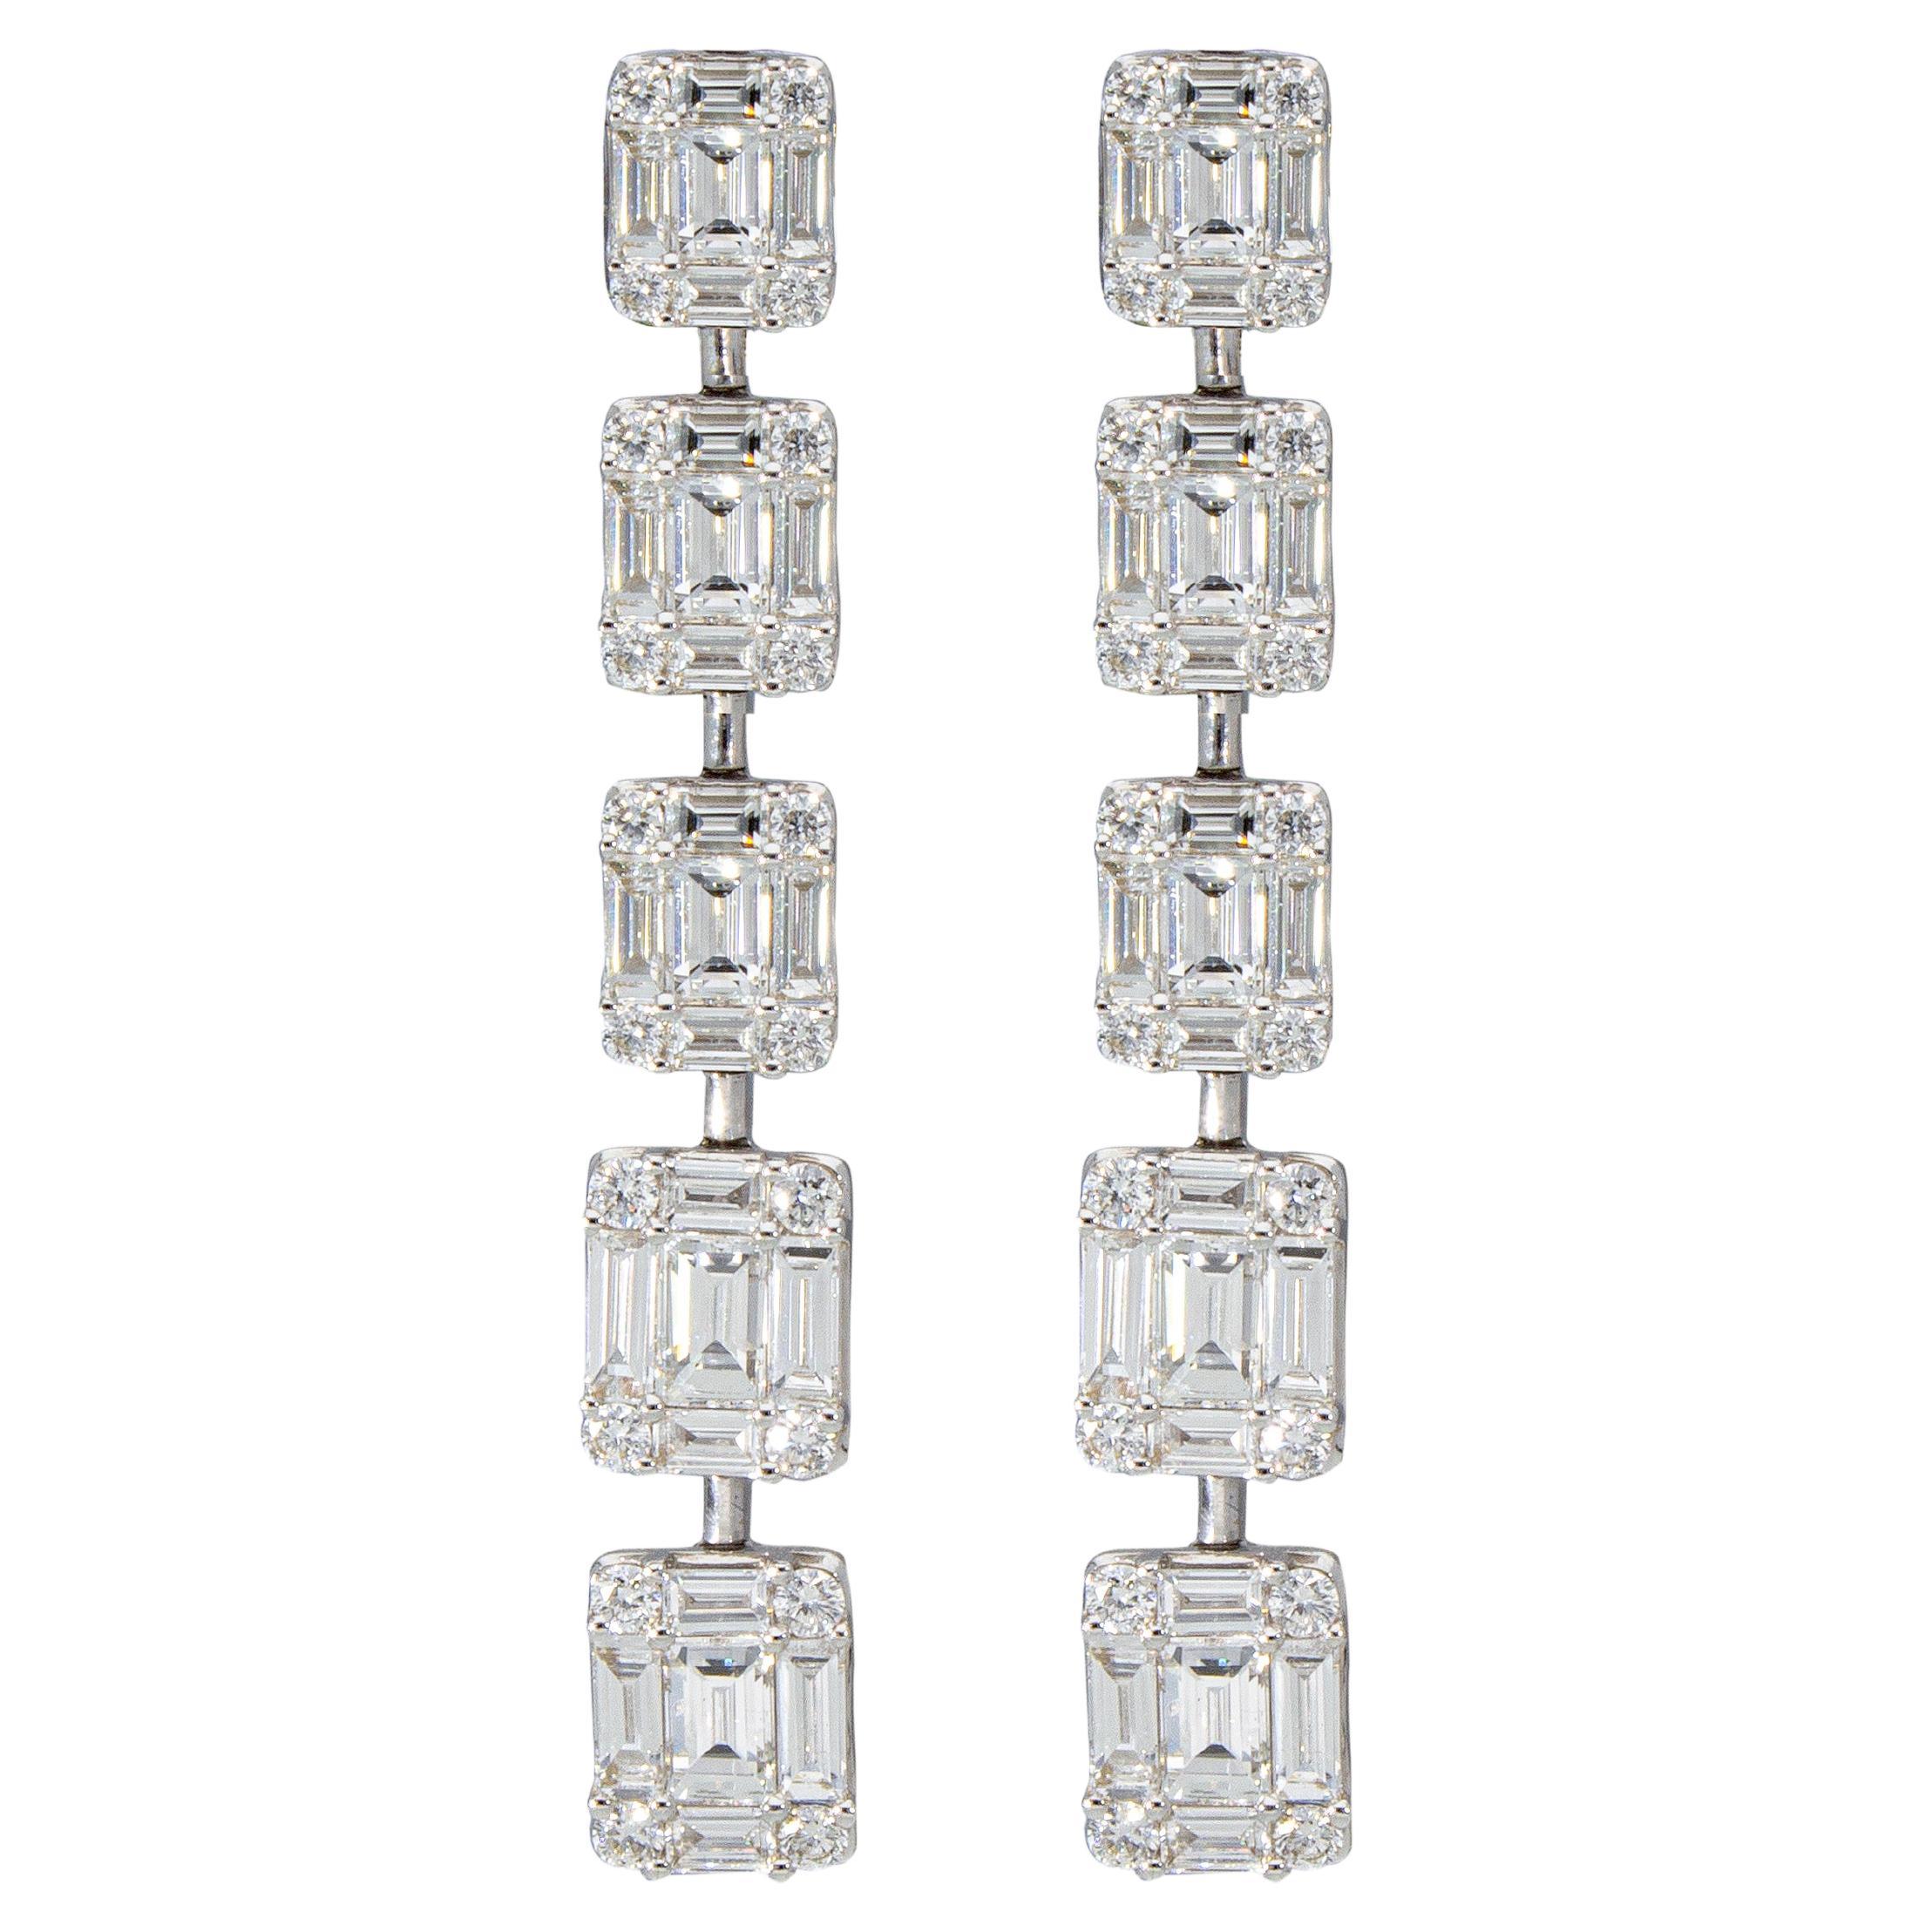 3.65 ct Drop Earrings of Diamonds, Diamond and Baguette Cut. 18 Kt White Gold For Sale